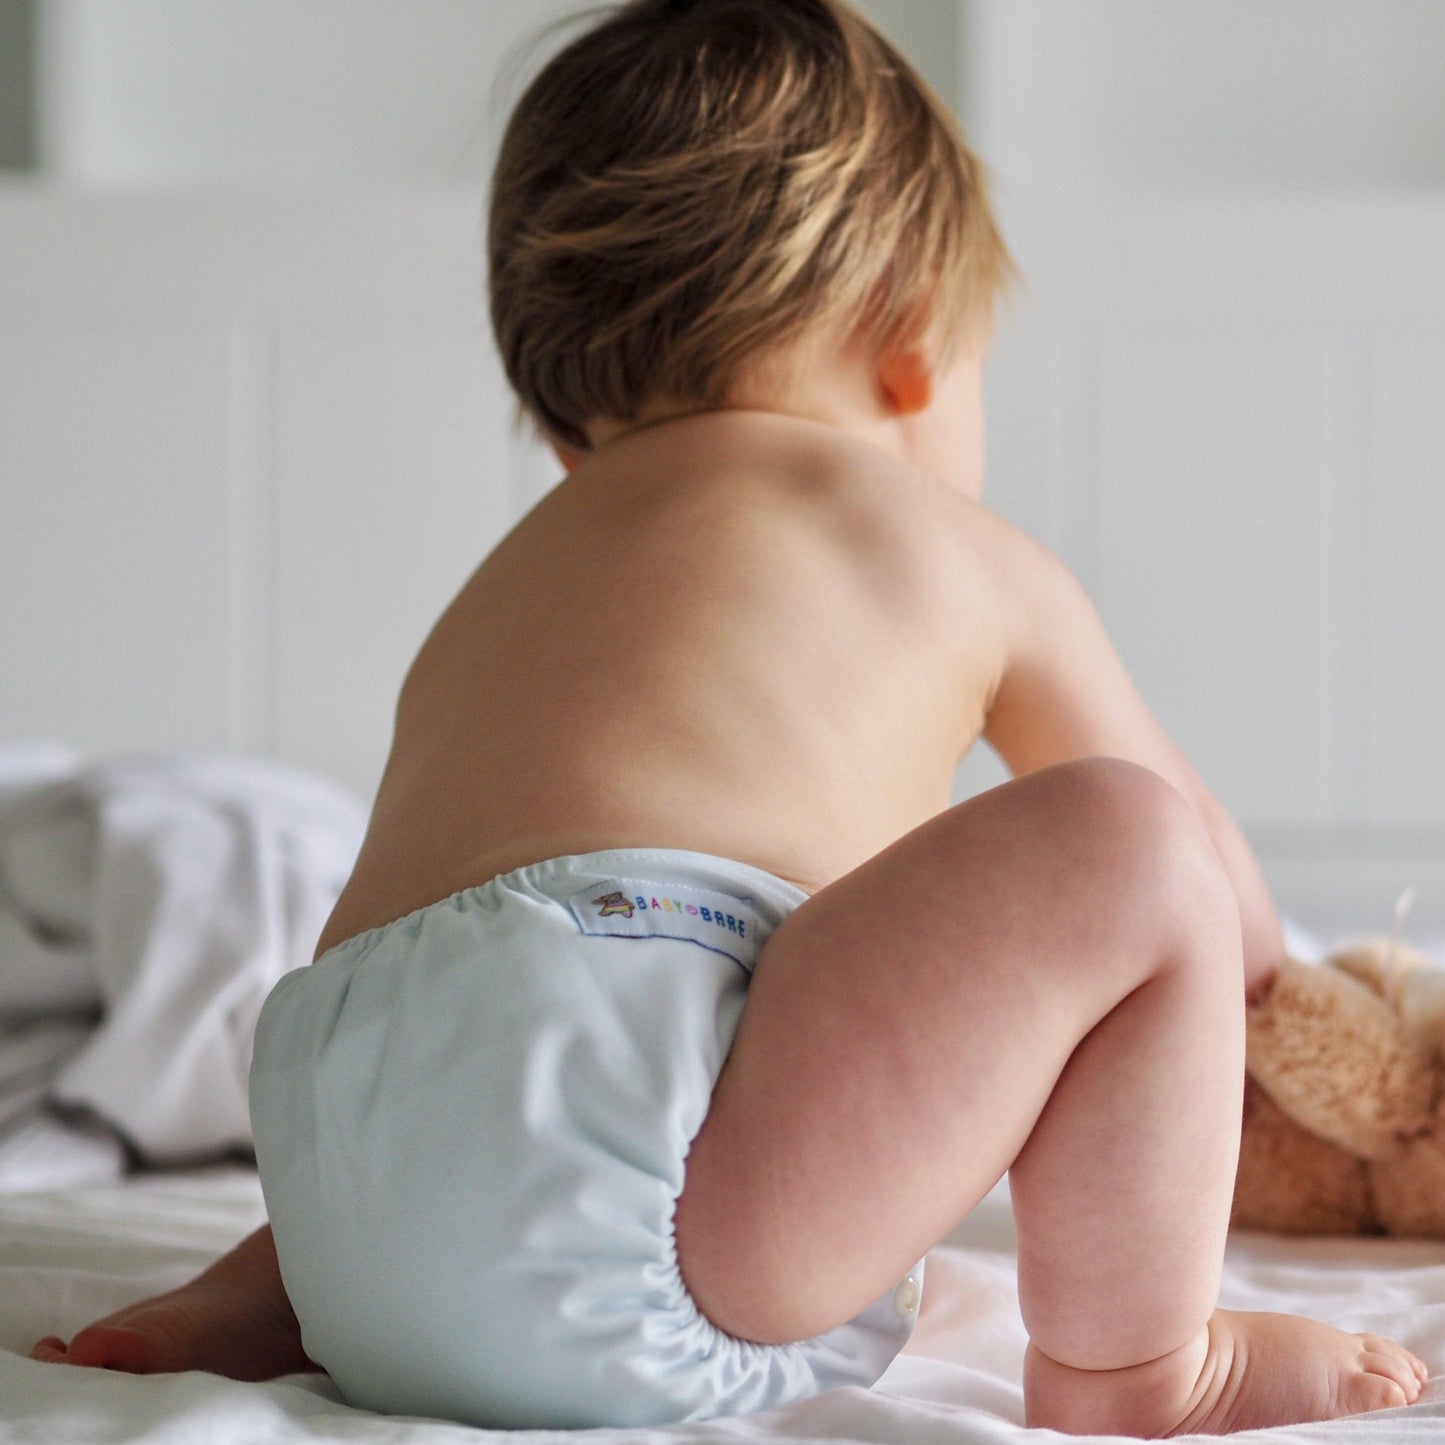 Toddler playing with a teddy bear facing away and wearing a blue nappy. 